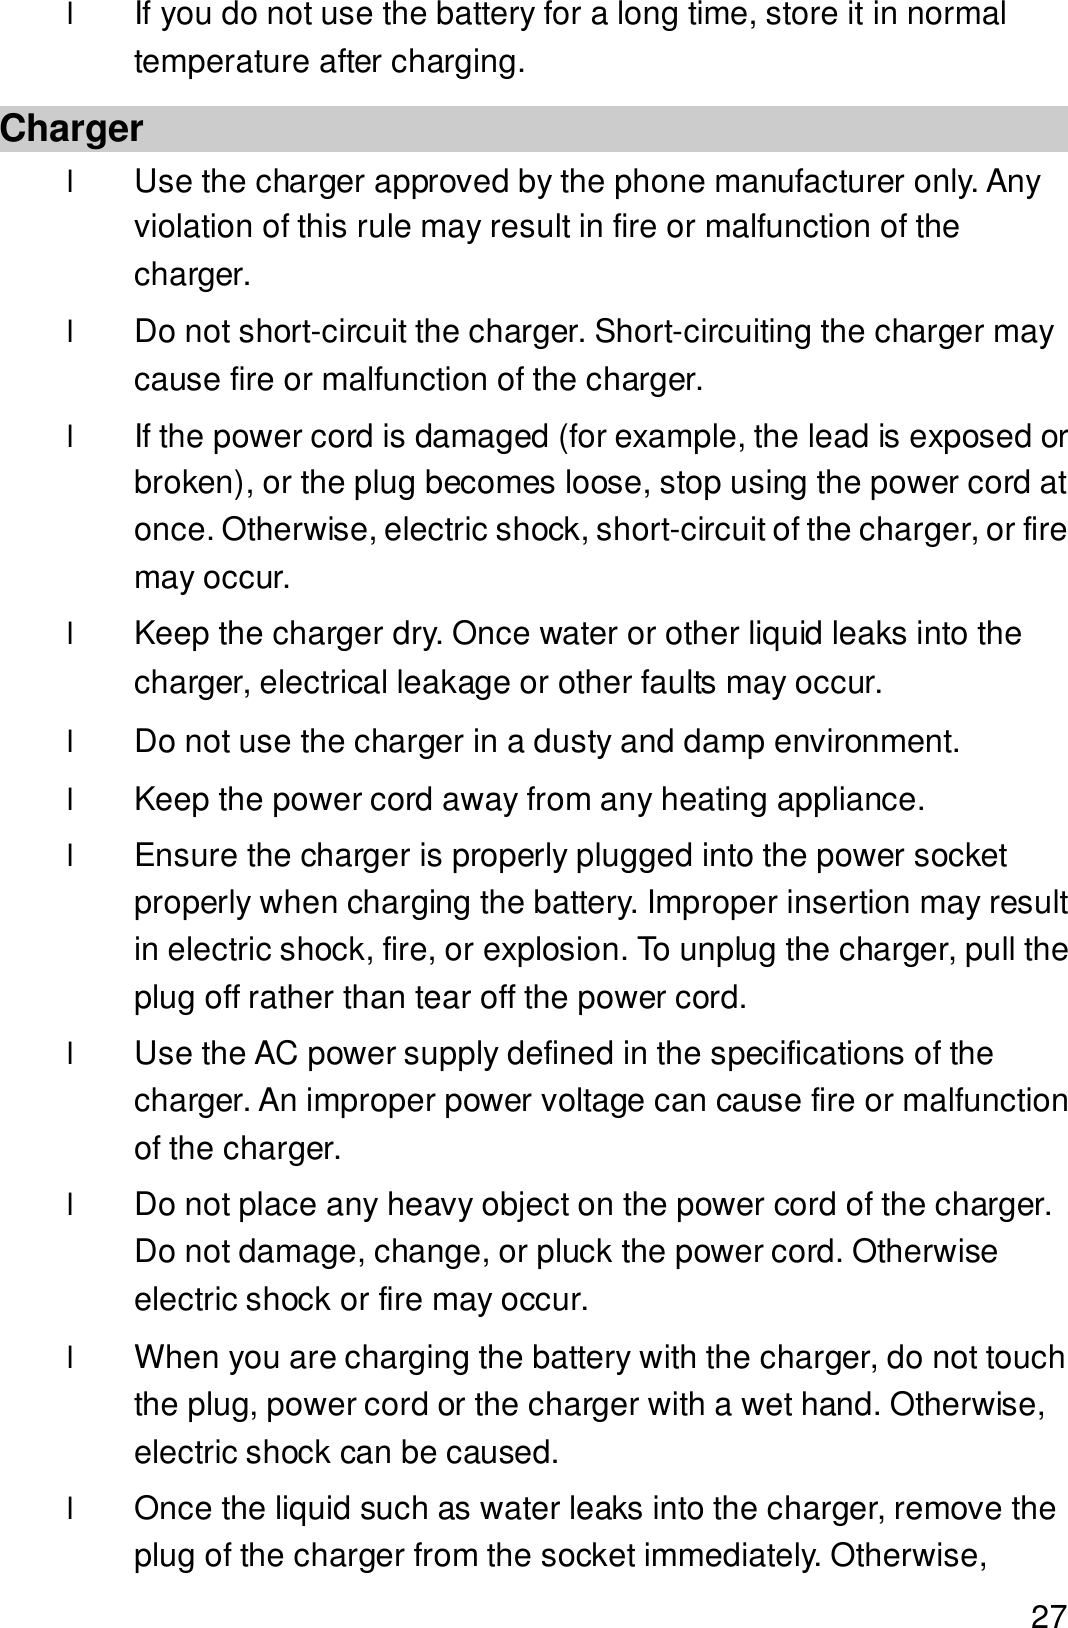  27 l If you do not use the battery for a long time, store it in normal temperature after charging. Charger l Use the charger approved by the phone manufacturer only. Any violation of this rule may result in fire or malfunction of the charger. l Do not short-circuit the charger. Short-circuiting the charger may cause fire or malfunction of the charger. l If the power cord is damaged (for example, the lead is exposed or broken), or the plug becomes loose, stop using the power cord at once. Otherwise, electric shock, short-circuit of the charger, or fire may occur. l Keep the charger dry. Once water or other liquid leaks into the charger, electrical leakage or other faults may occur. l Do not use the charger in a dusty and damp environment.  l Keep the power cord away from any heating appliance. l Ensure the charger is properly plugged into the power socket properly when charging the battery. Improper insertion may result in electric shock, fire, or explosion. To unplug the charger, pull the plug off rather than tear off the power cord. l Use the AC power supply defined in the specifications of the charger. An improper power voltage can cause fire or malfunction of the charger. l Do not place any heavy object on the power cord of the charger. Do not damage, change, or pluck the power cord. Otherwise electric shock or fire may occur. l When you are charging the battery with the charger, do not touch the plug, power cord or the charger with a wet hand. Otherwise, electric shock can be caused. l Once the liquid such as water leaks into the charger, remove the plug of the charger from the socket immediately. Otherwise, 